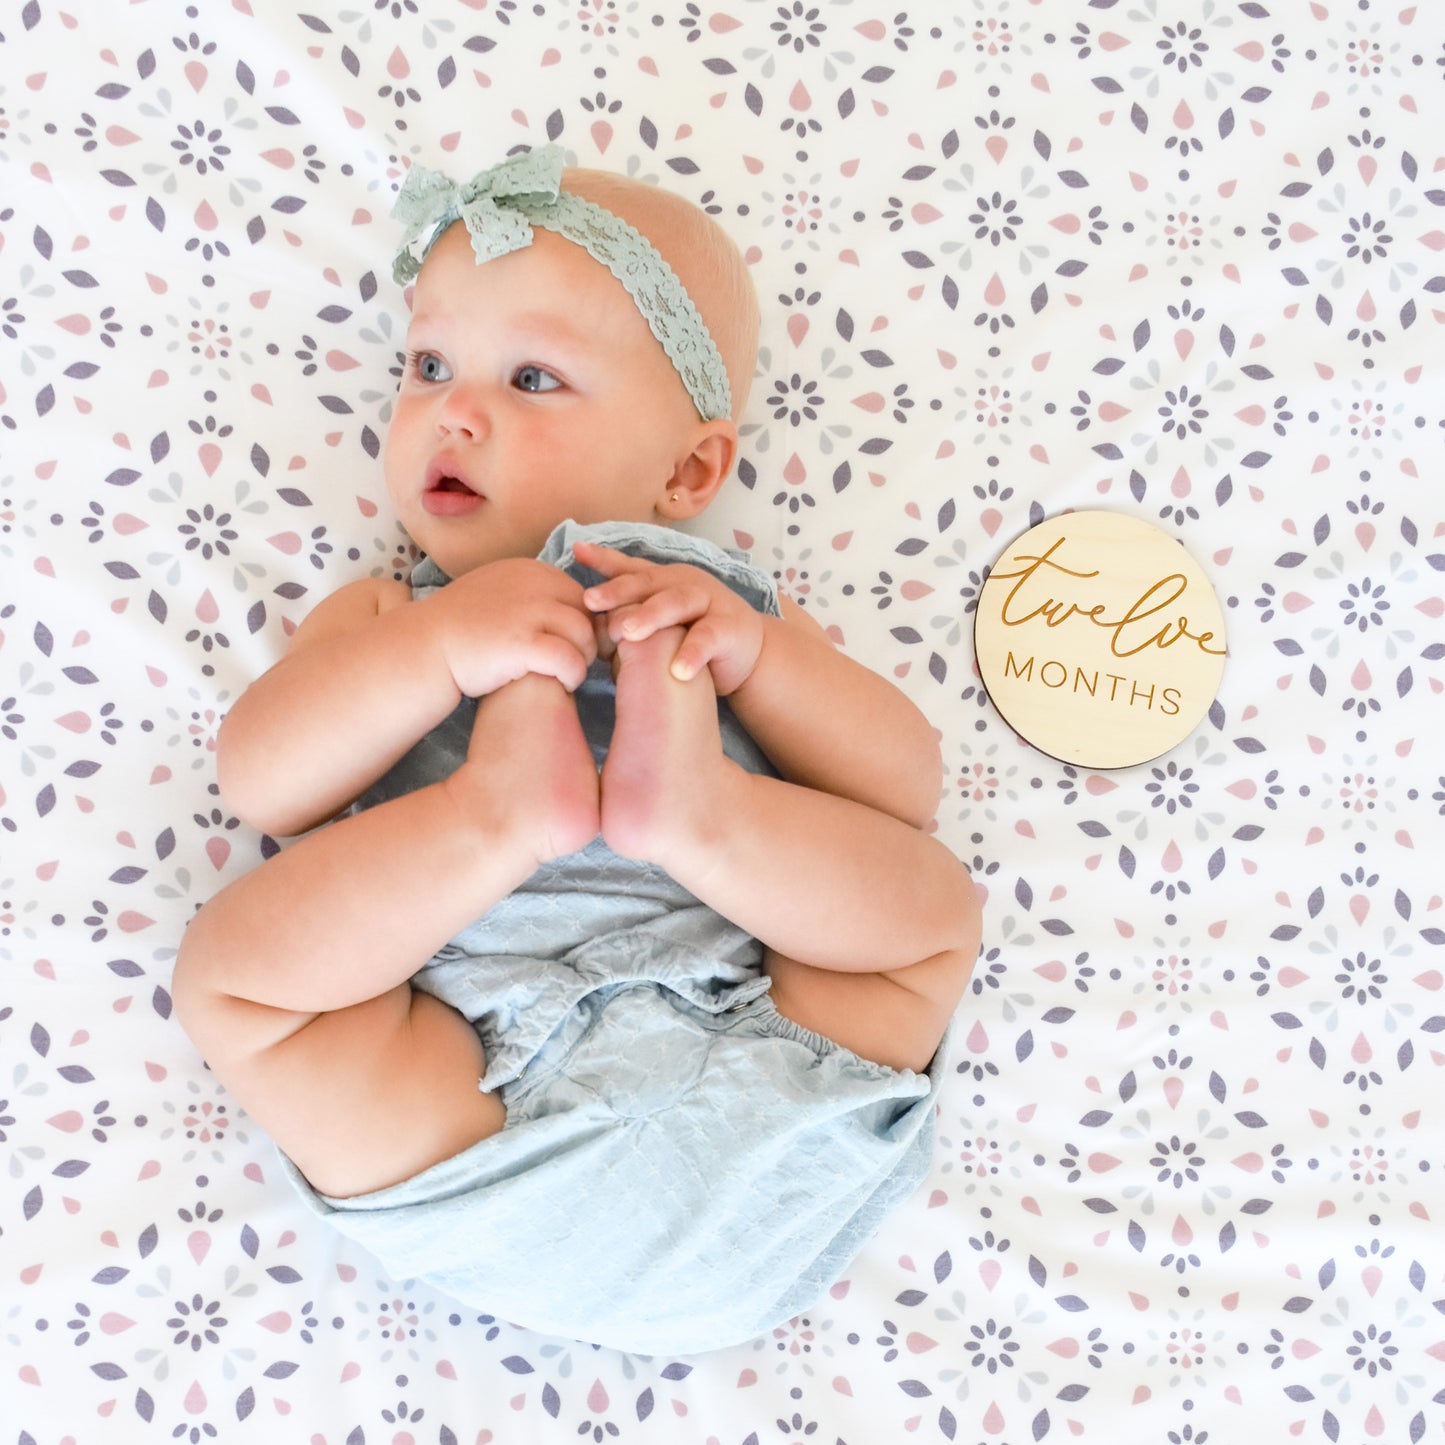 baby with twelve month milestone sign pattern blanket lace headband photography